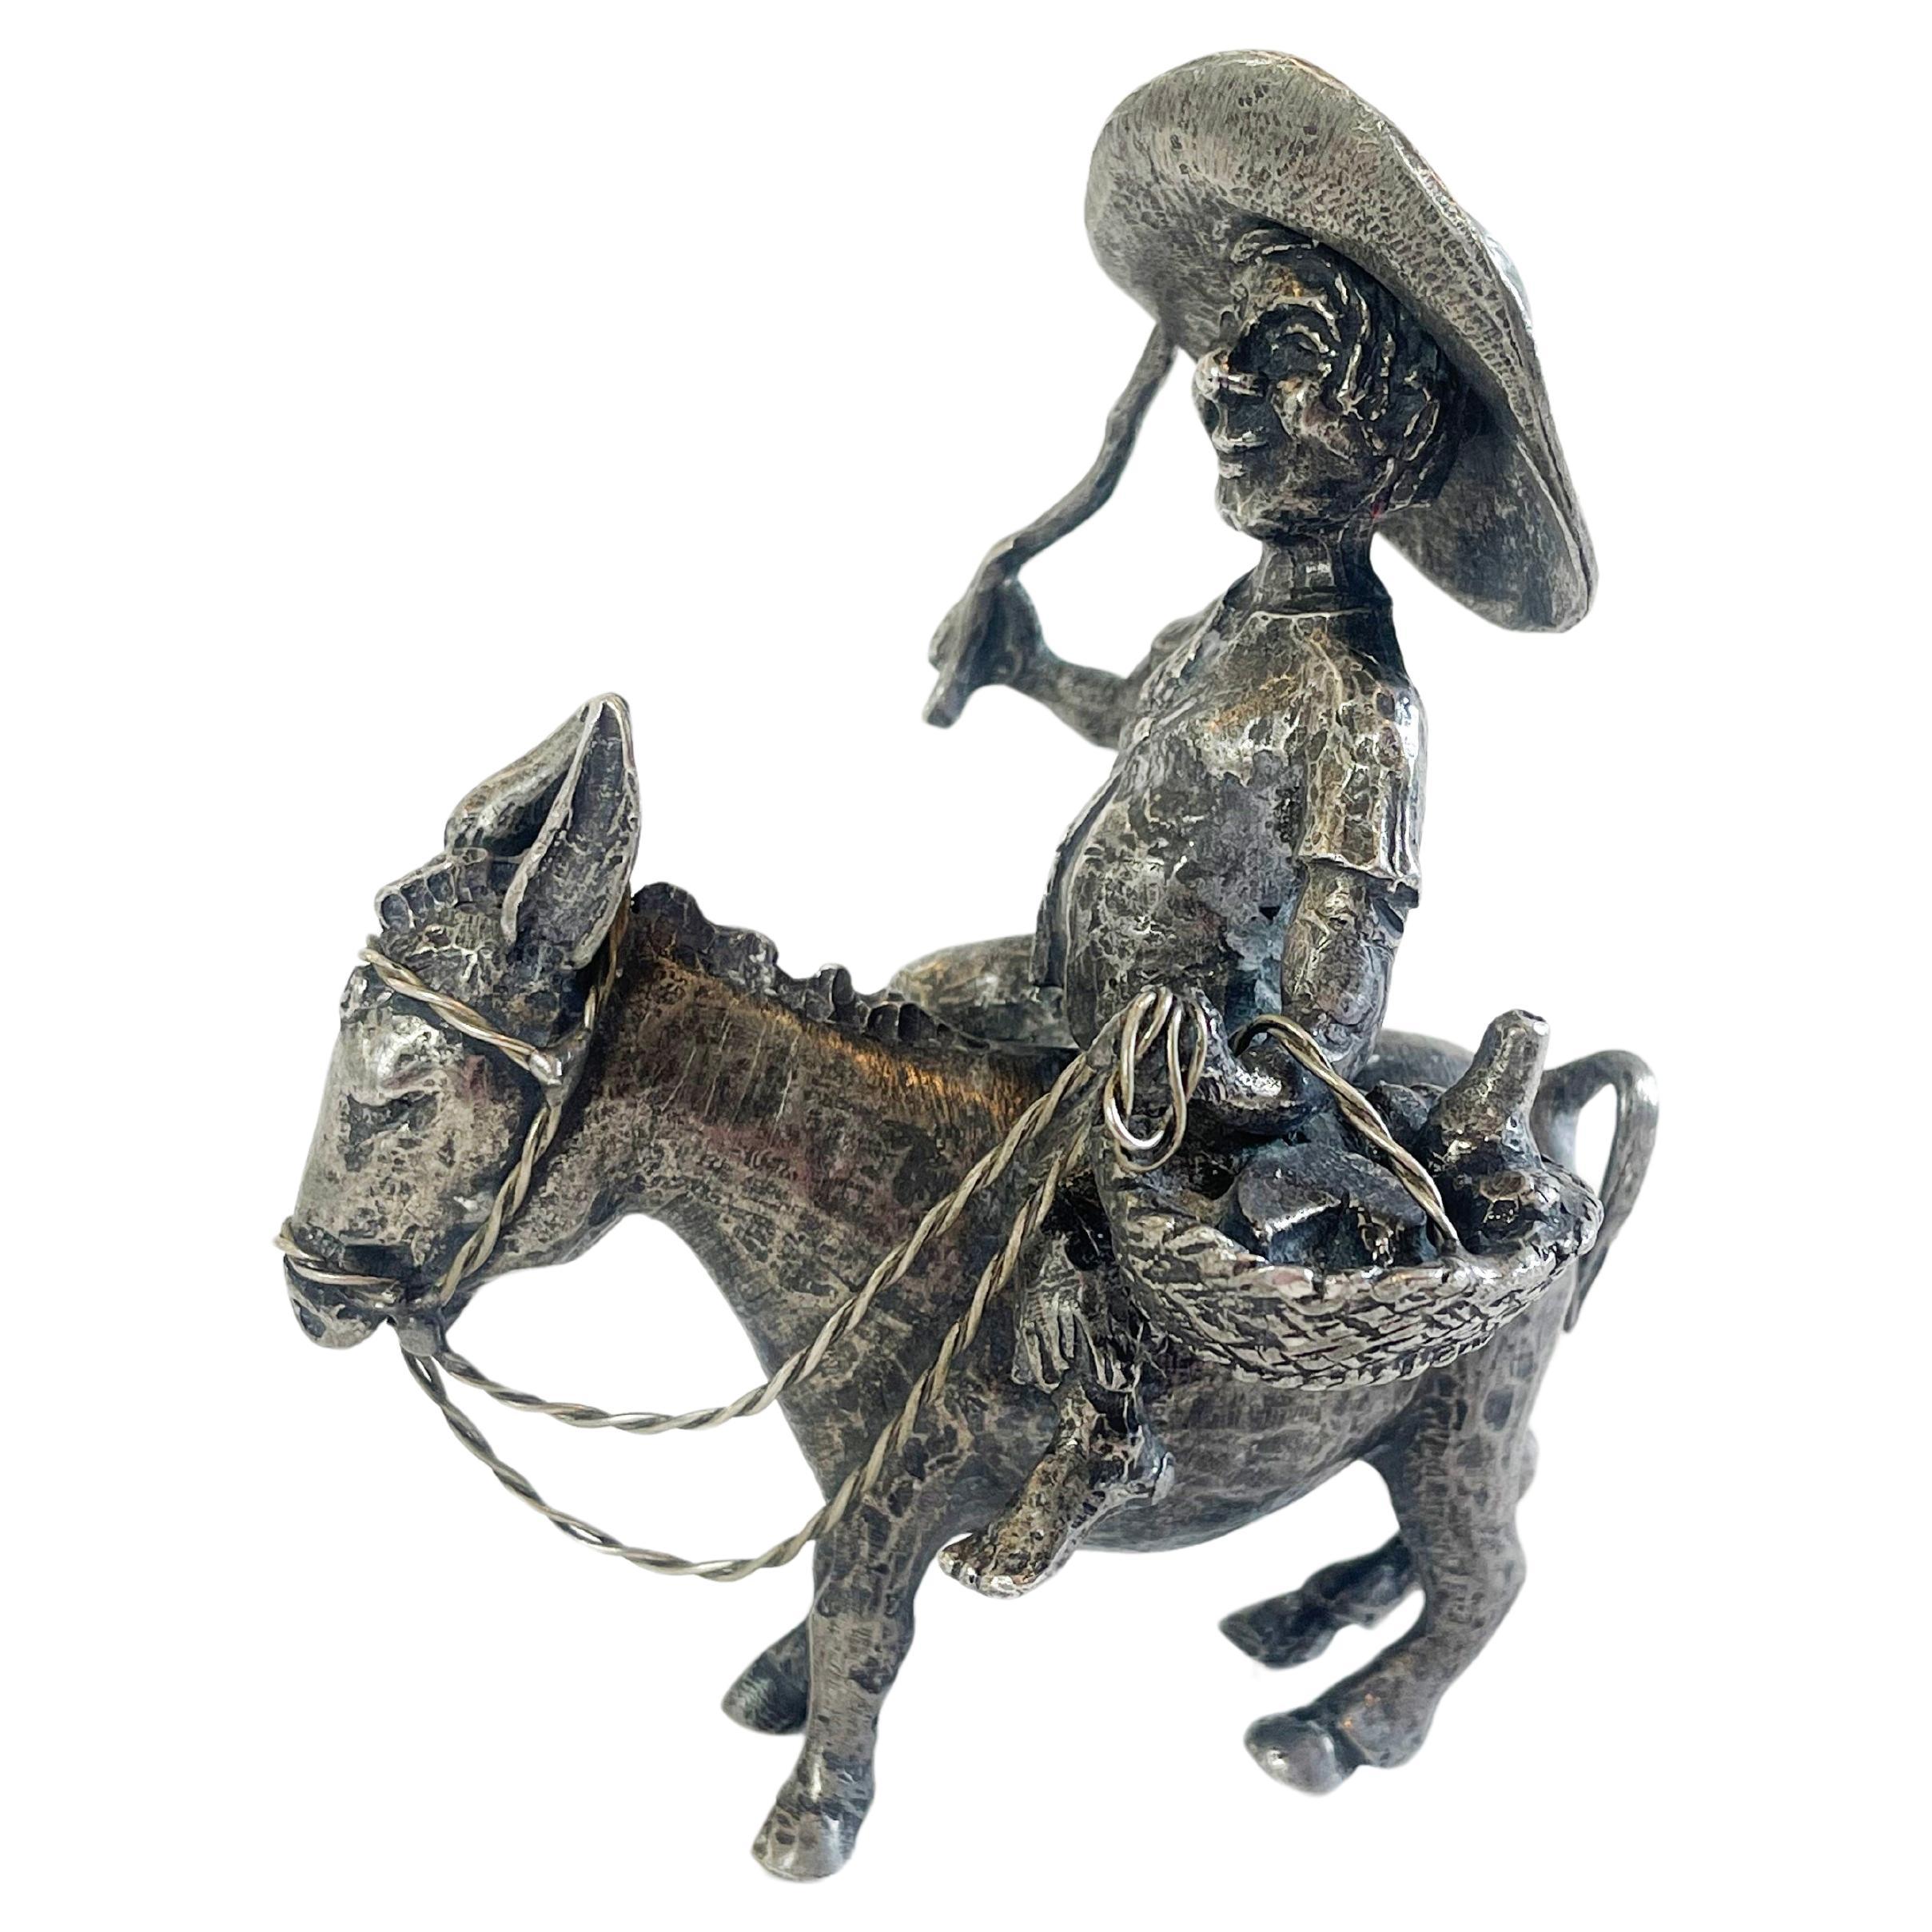 Signed Sancho Panza Riding his Donkey, Pewter Figurine by Michel Laude, France For Sale